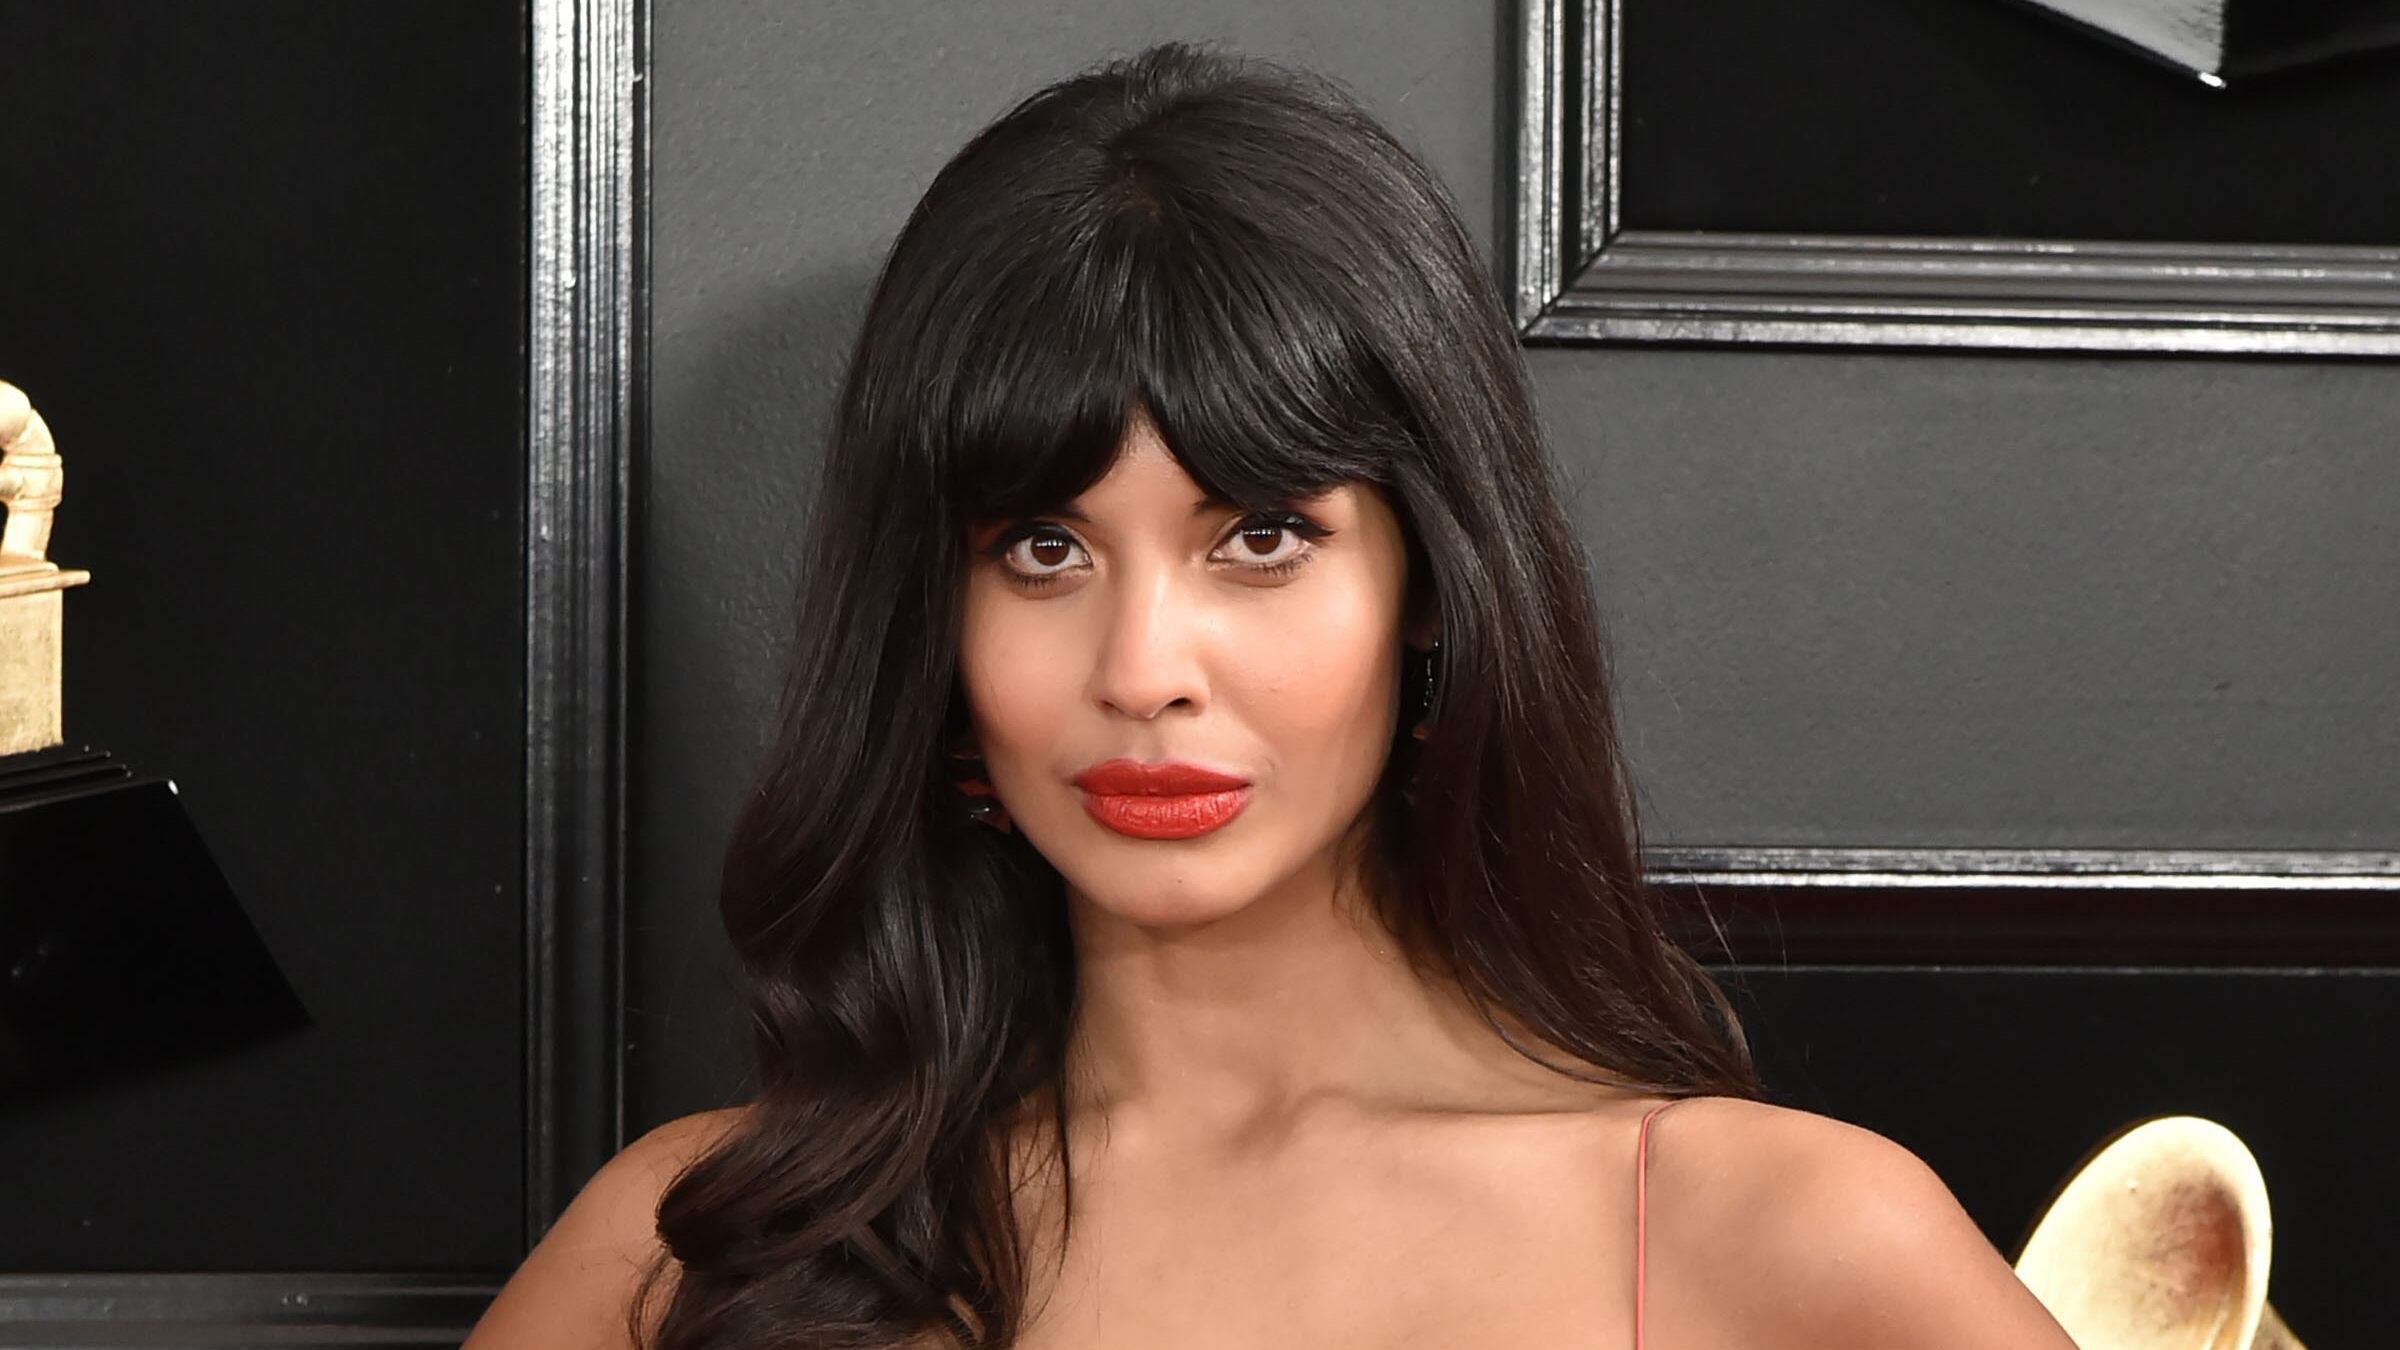 'The Good Place' star Jameela Jamil remembers she felt 'too fat' while struggling with eating disorder - www.foxnews.com